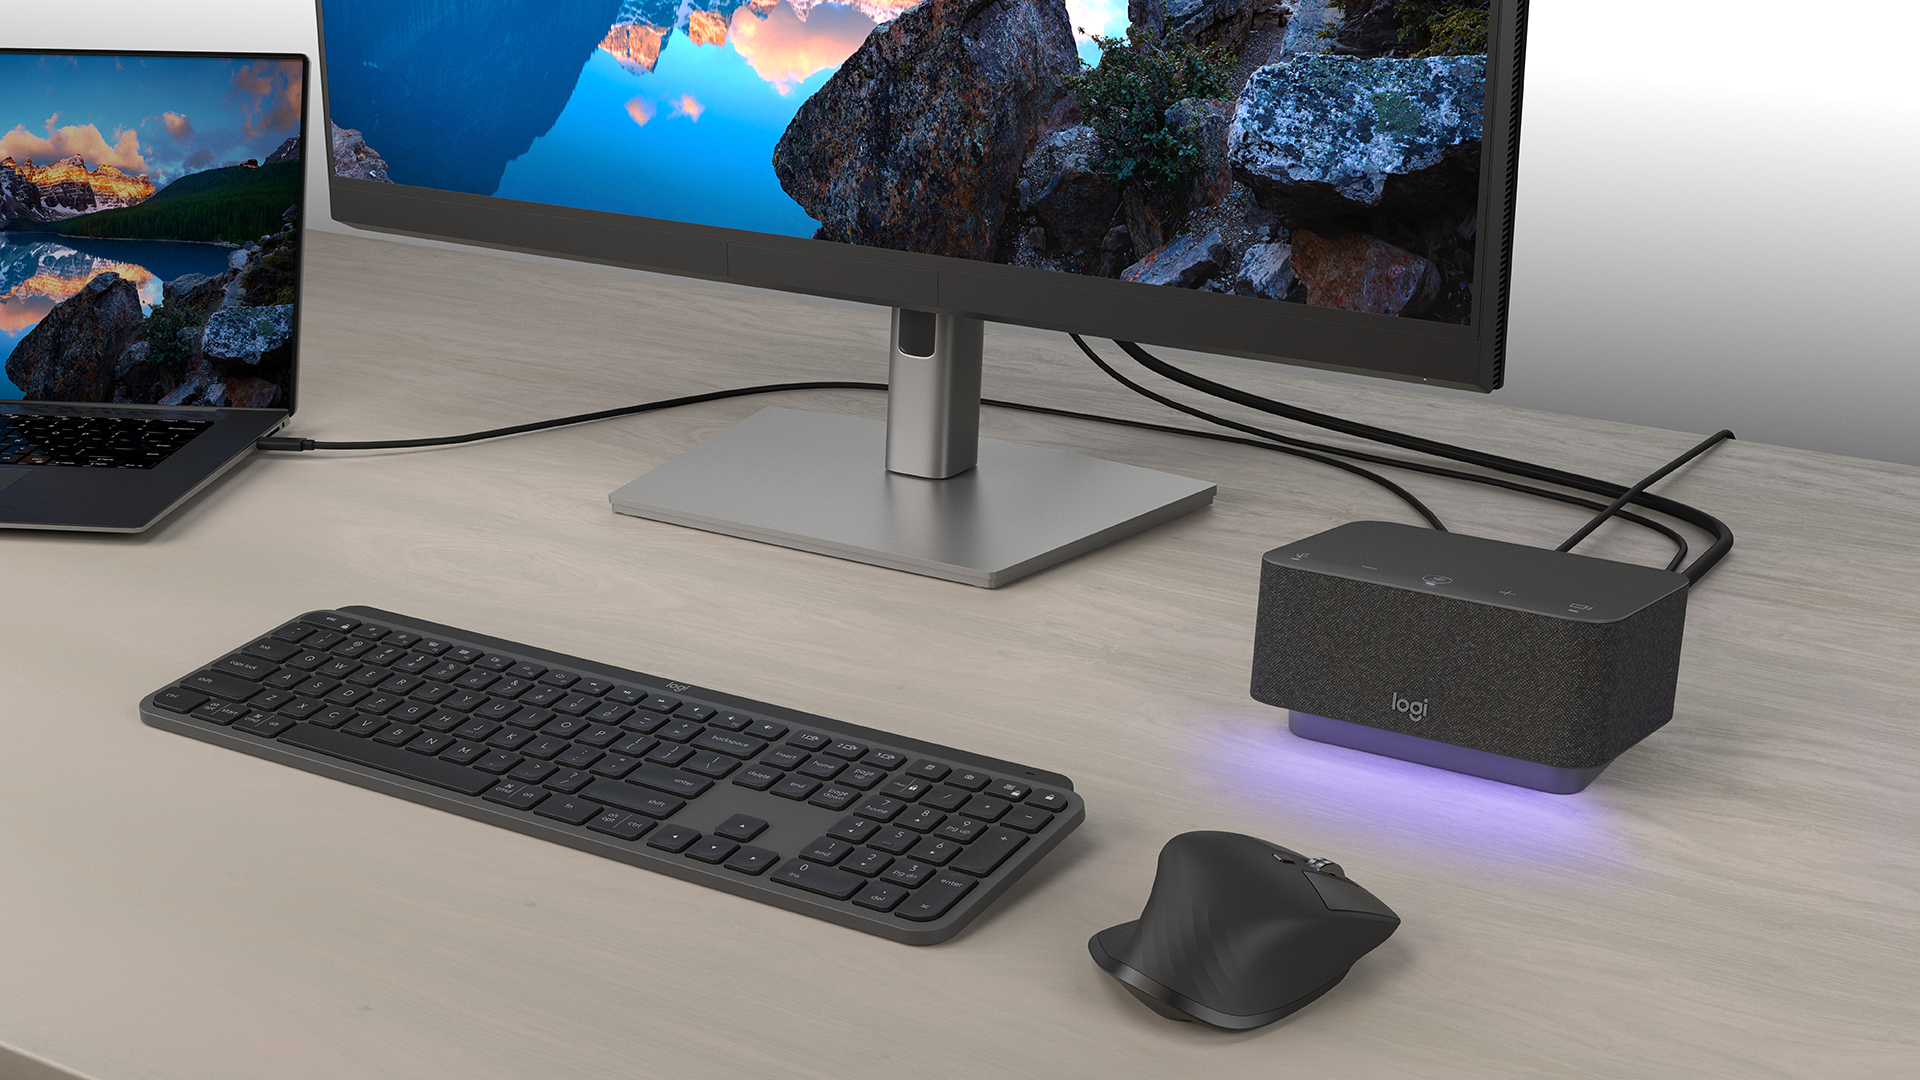 By connecting the Logitech wireless keyboard and mouse through the Unifying receptor, the USB ports are now free for other devices such as the webcam, personal microphone, and light ring (Credit: Logitech Press)